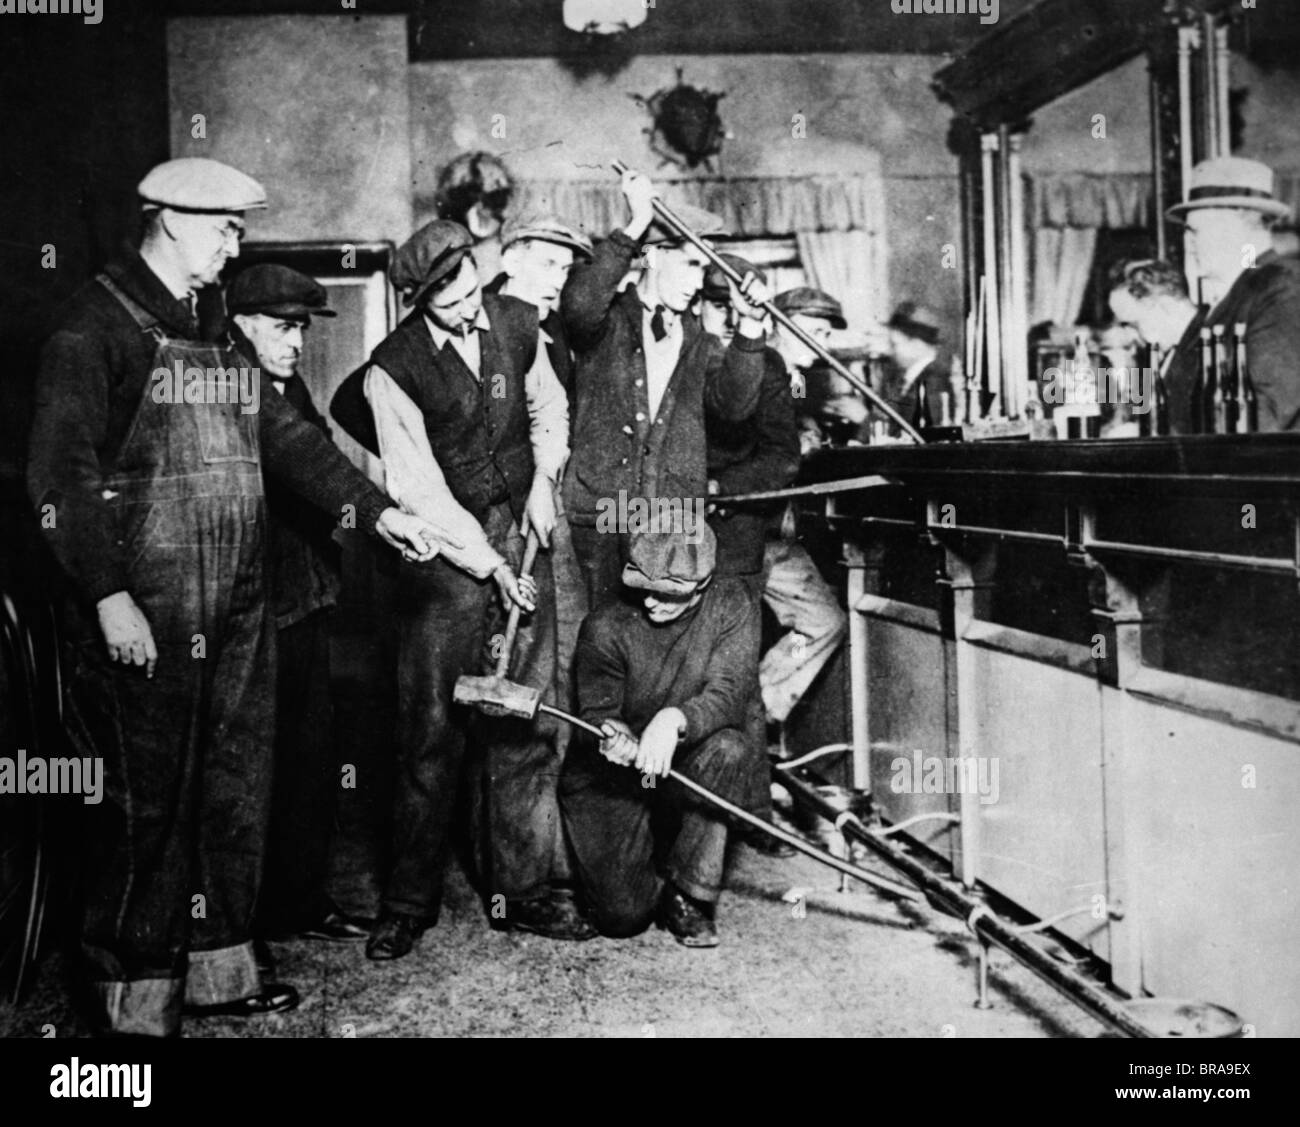 1920s 1930s PROHIBITION RAID FEDERAL AGENTS RIPPING UP DESTROYING BAR TO SEE IF LIQUOR IS HIDDEN Stock Photo